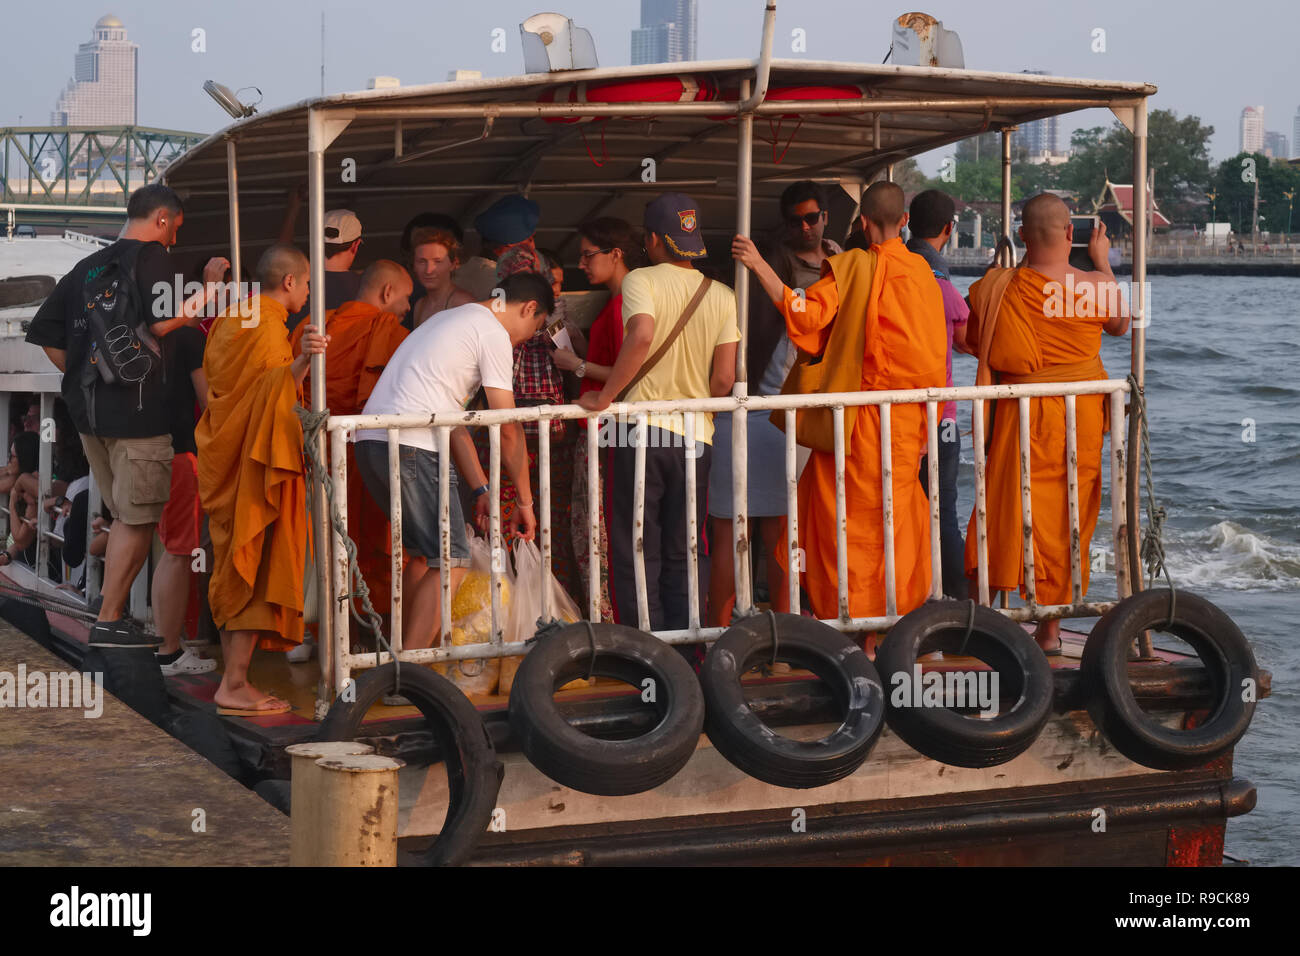 Buddhist monks, other local passengers and tourists on an express boat on the Chao Phraya River, Bangkok, Thailand Stock Photo